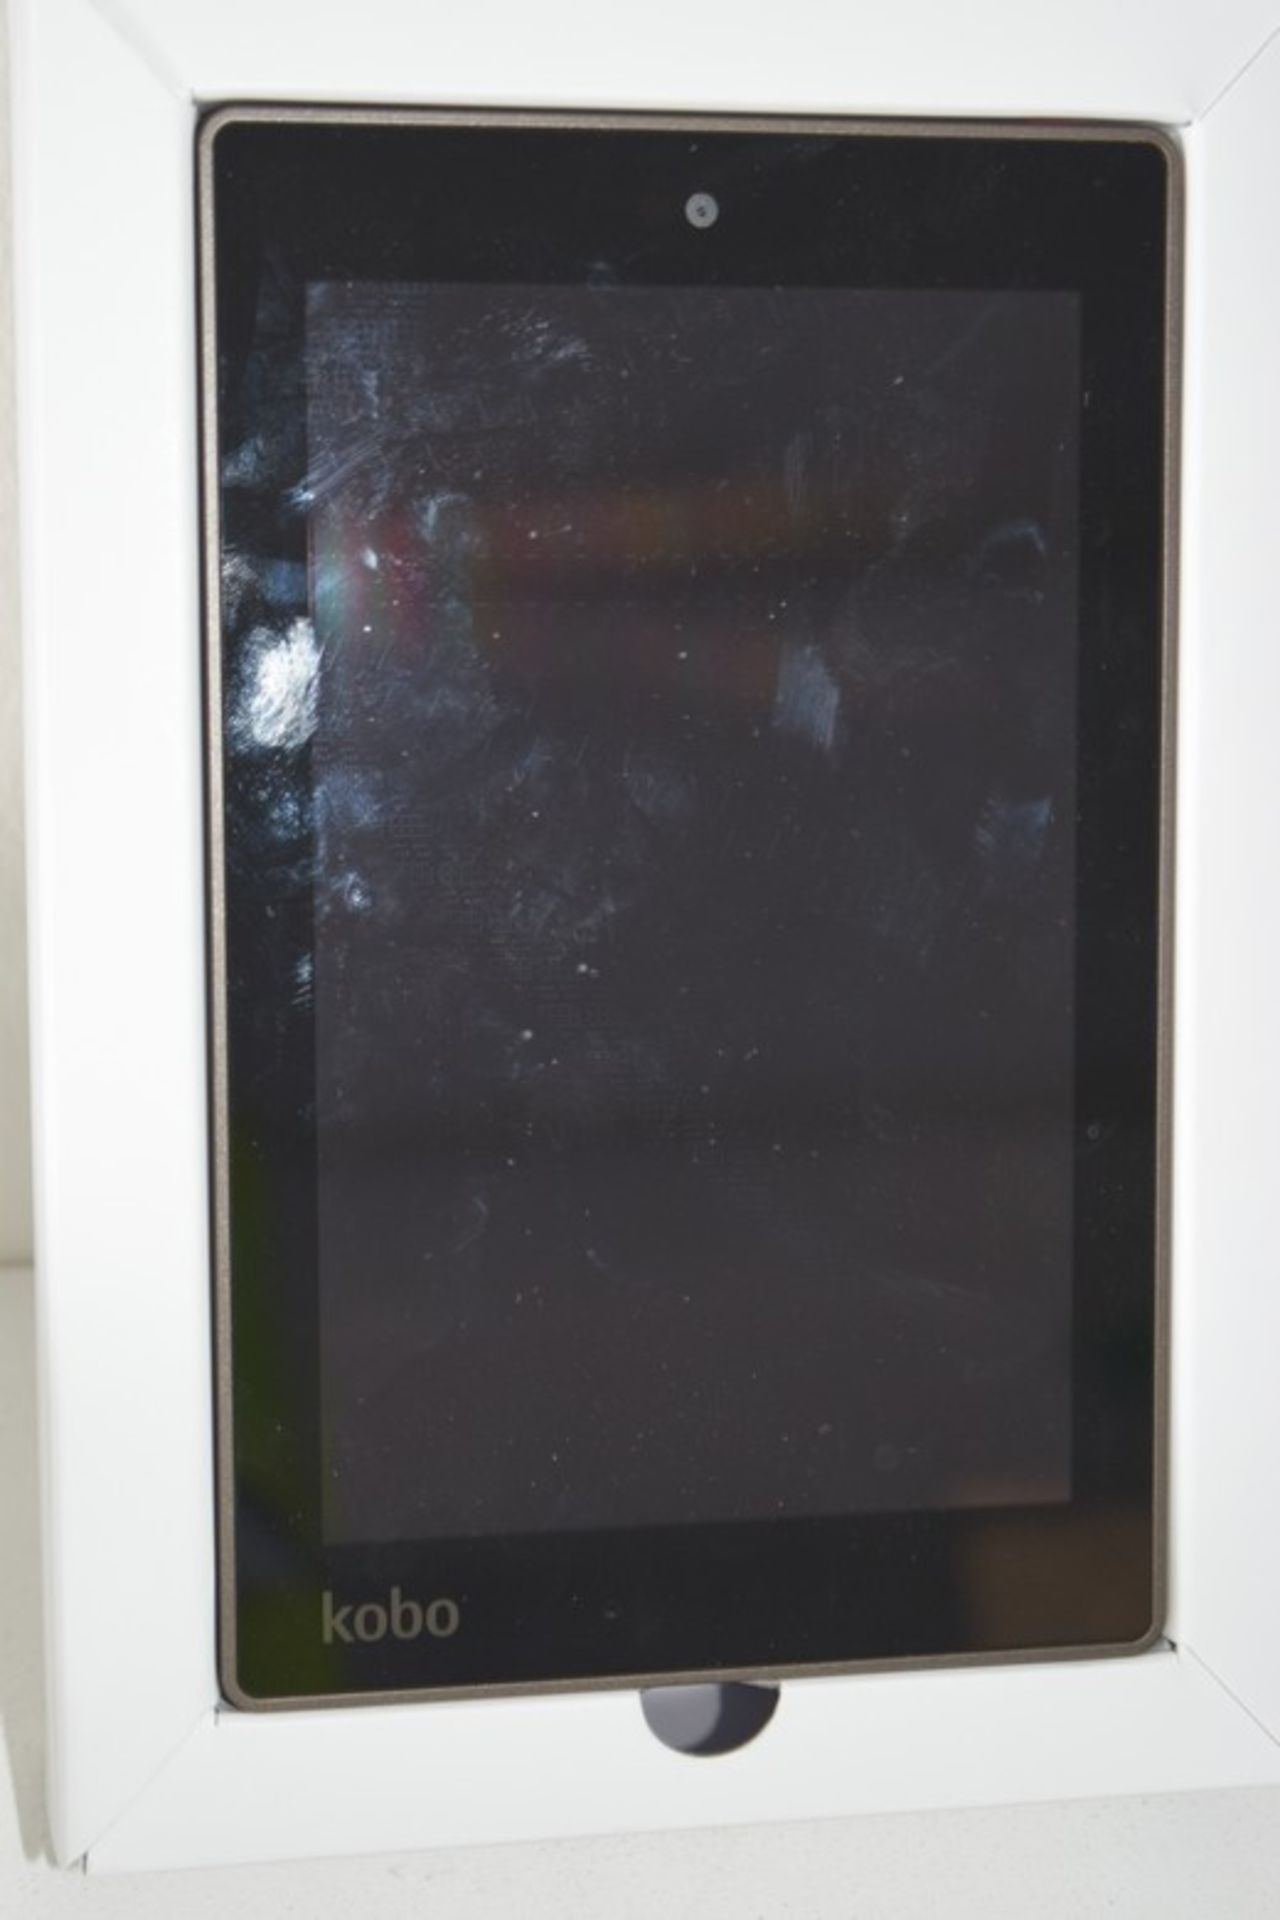 1 x BOXED KOBO ARC 7HD TABLET RRP £120 PALLET (1502) (AC) *PLEASE NOTE THAT THE BID PRICE IS